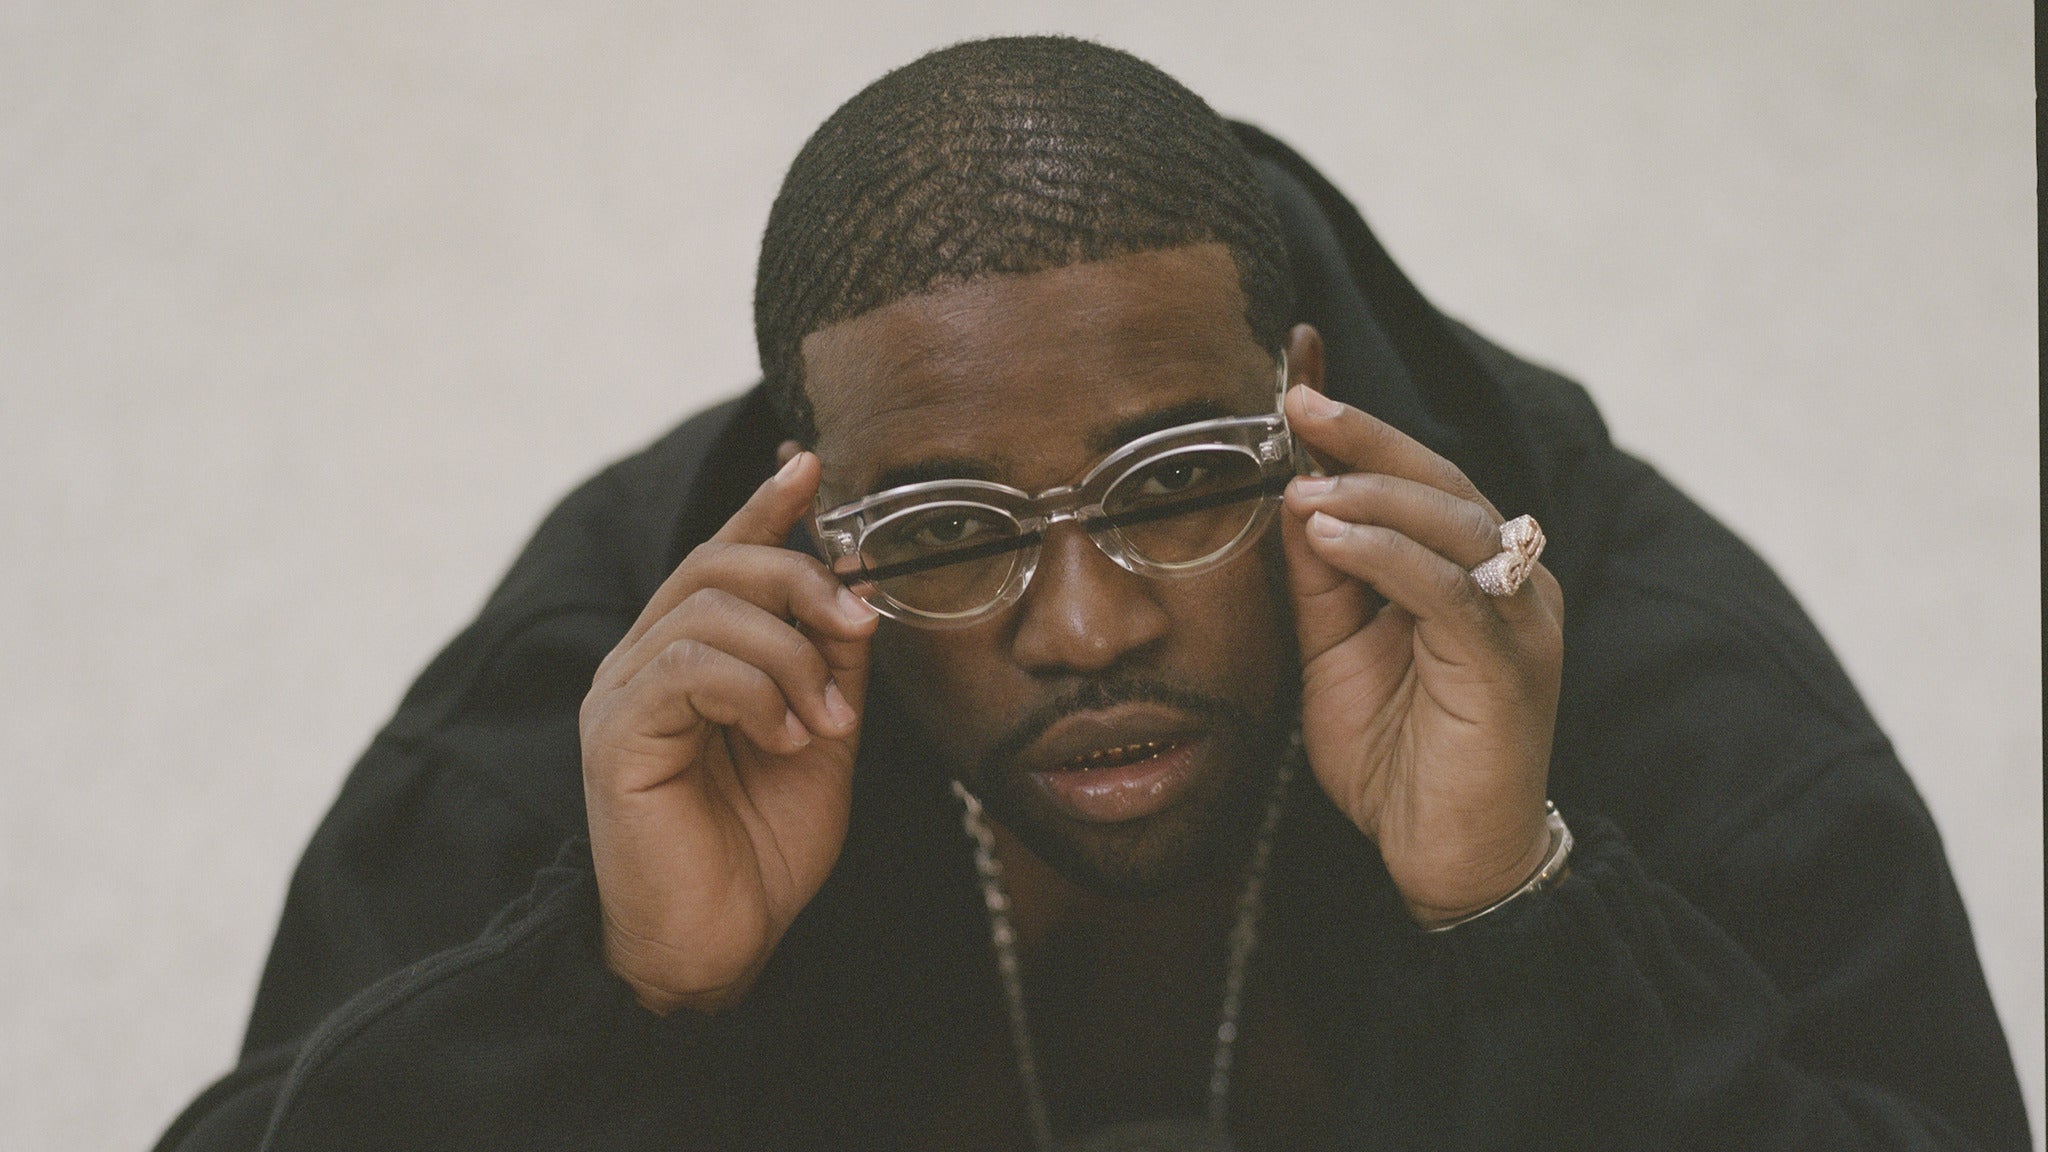 FERG presents Mad Man Tour in Indianapolis promo photo for Live Nation presale offer code